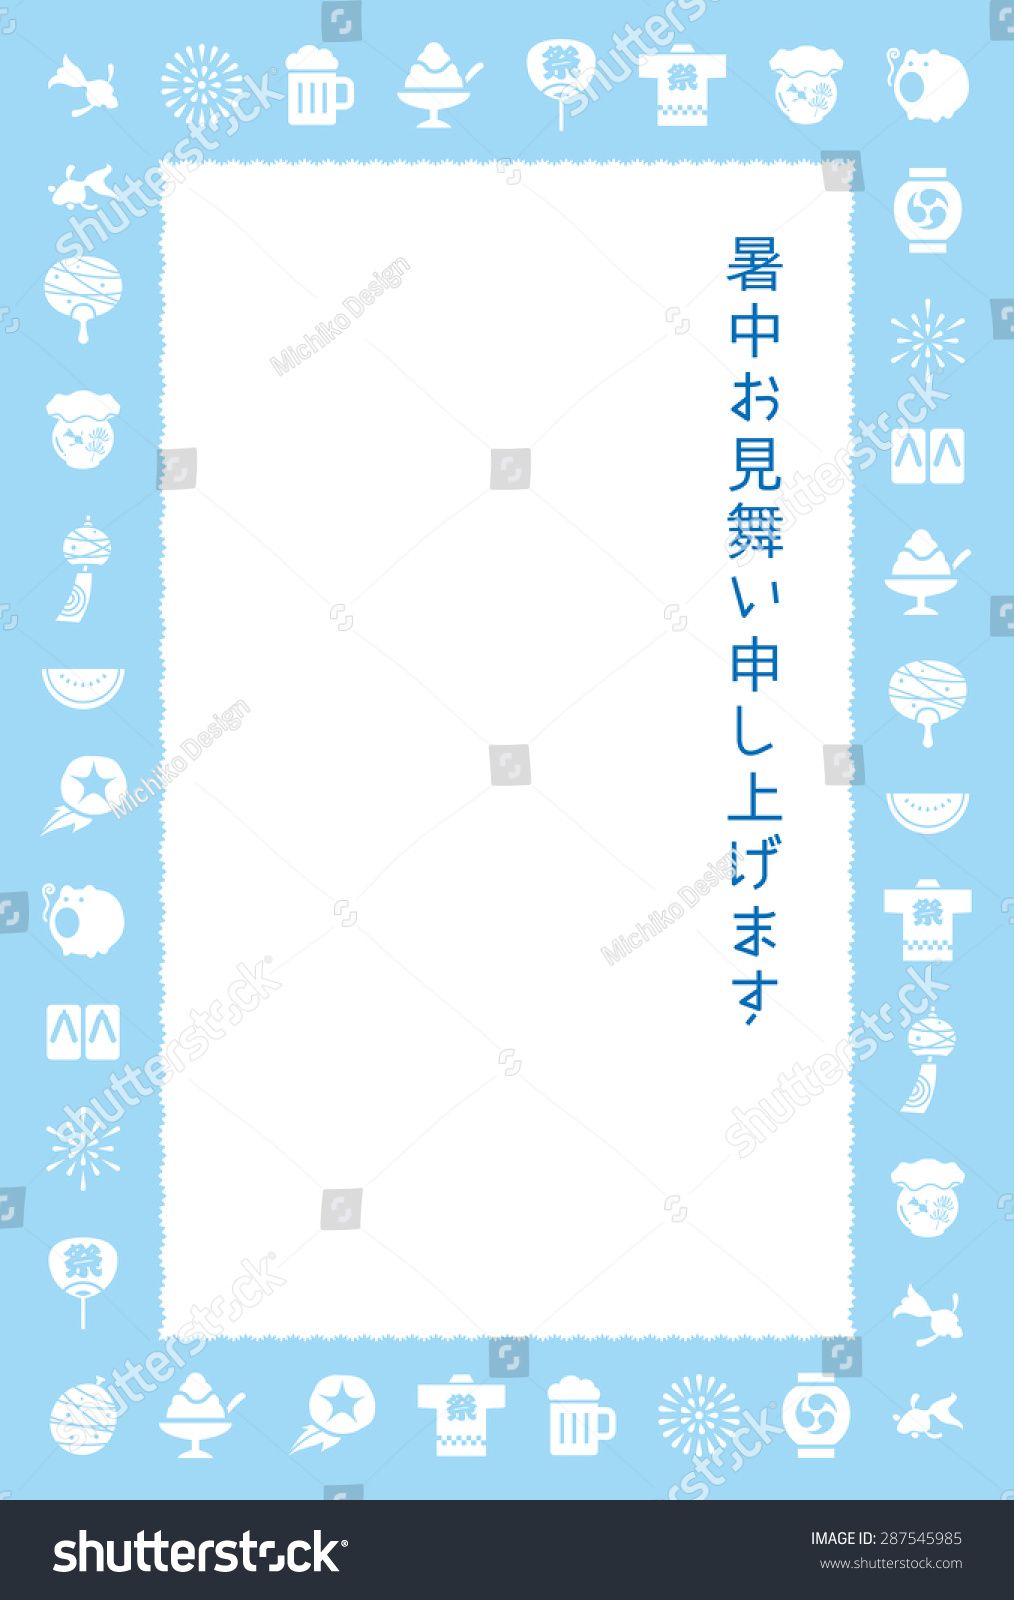 SVG of Japanese summer greeting card with summer symbol illustrations / translation of Japanese text is Summer Greeting svg